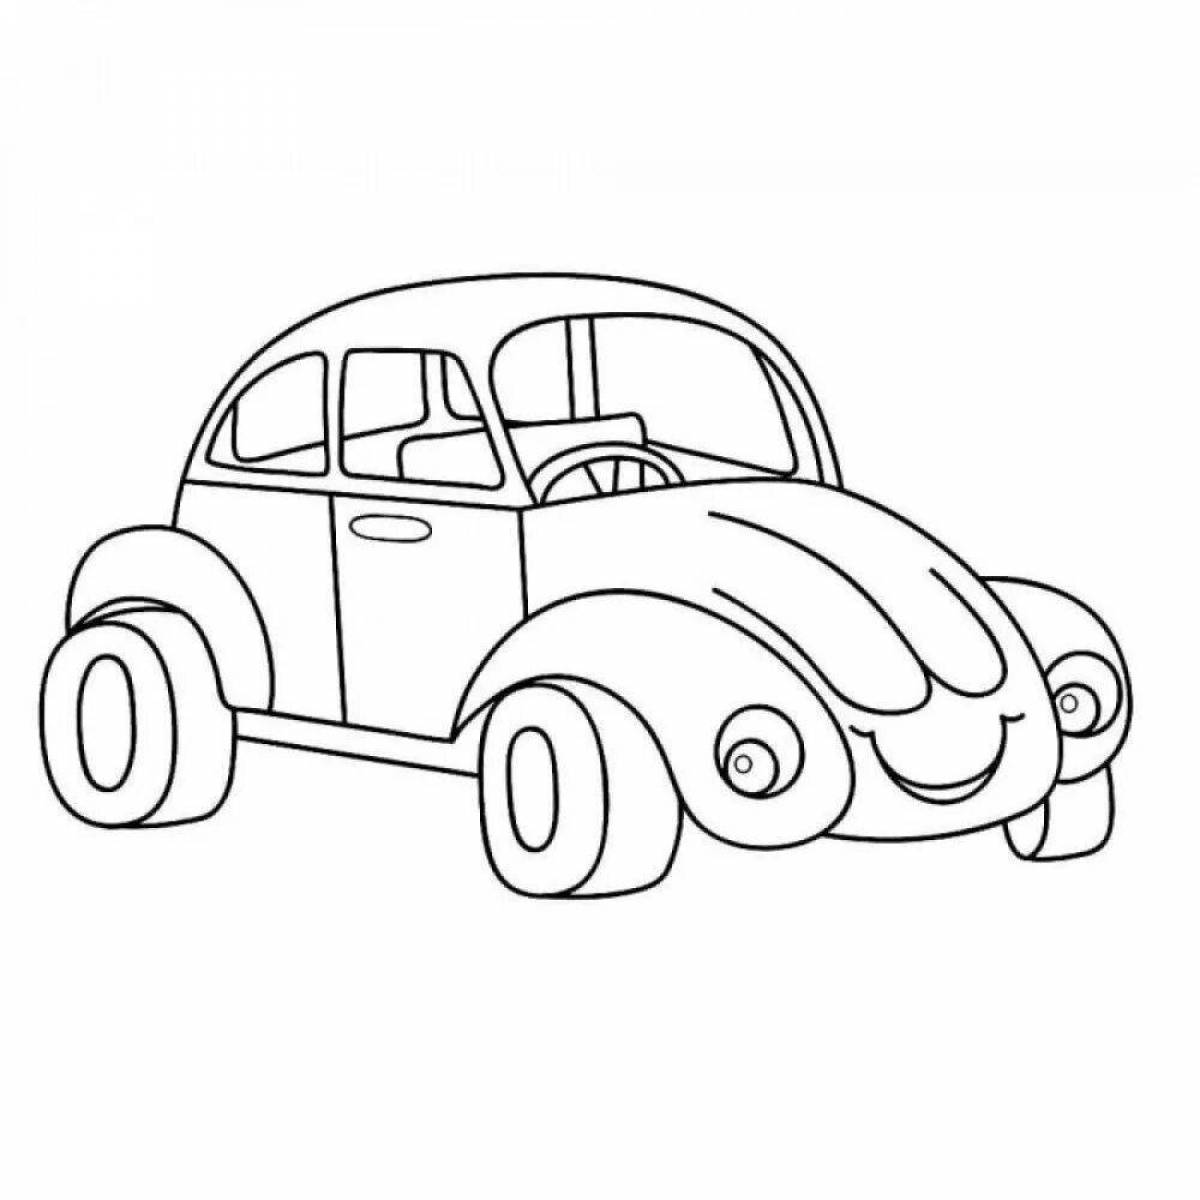 Coloring page of a sleek little car